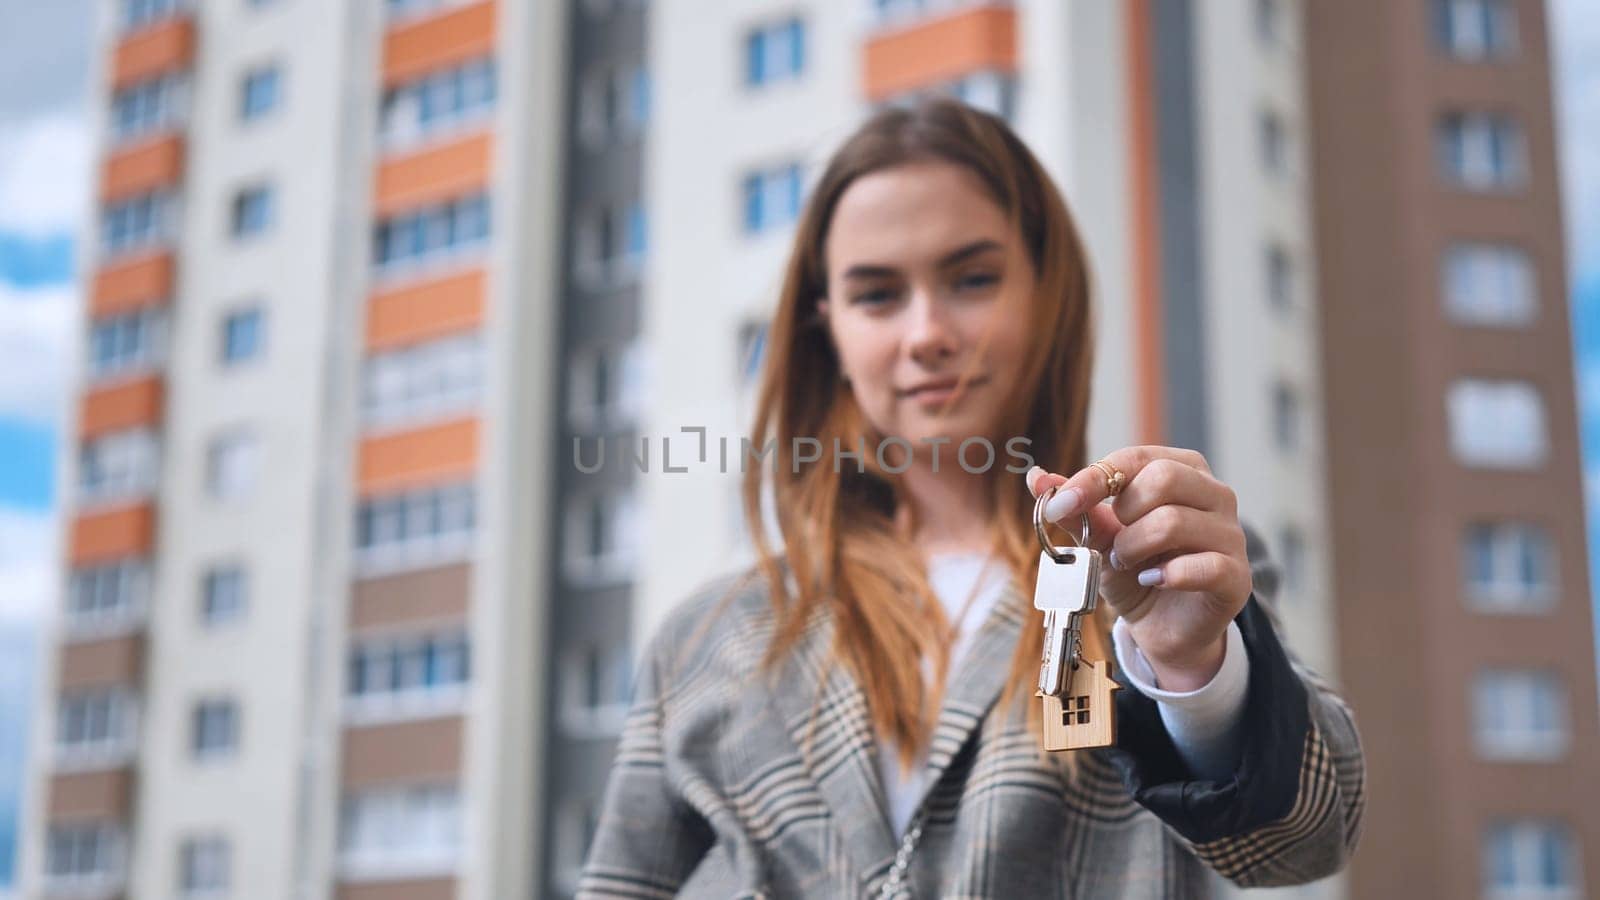 The girl shows the keys to the apartment against the backdrop of an apartment building. by DovidPro